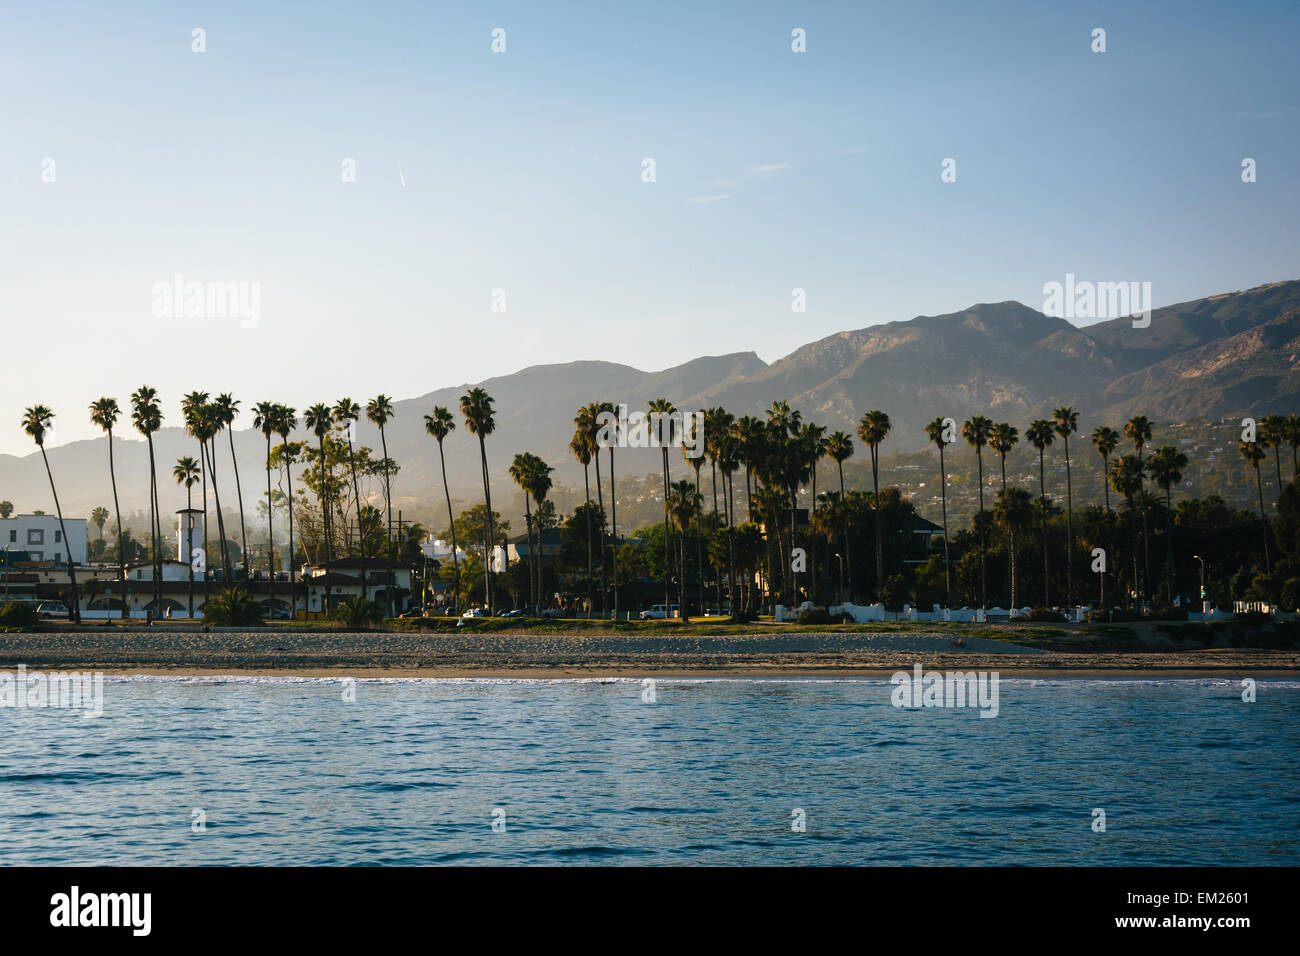 View of palm trees on the shore and mountains from Stearn's Wharf, in Santa Barbara, California. Stock Photo